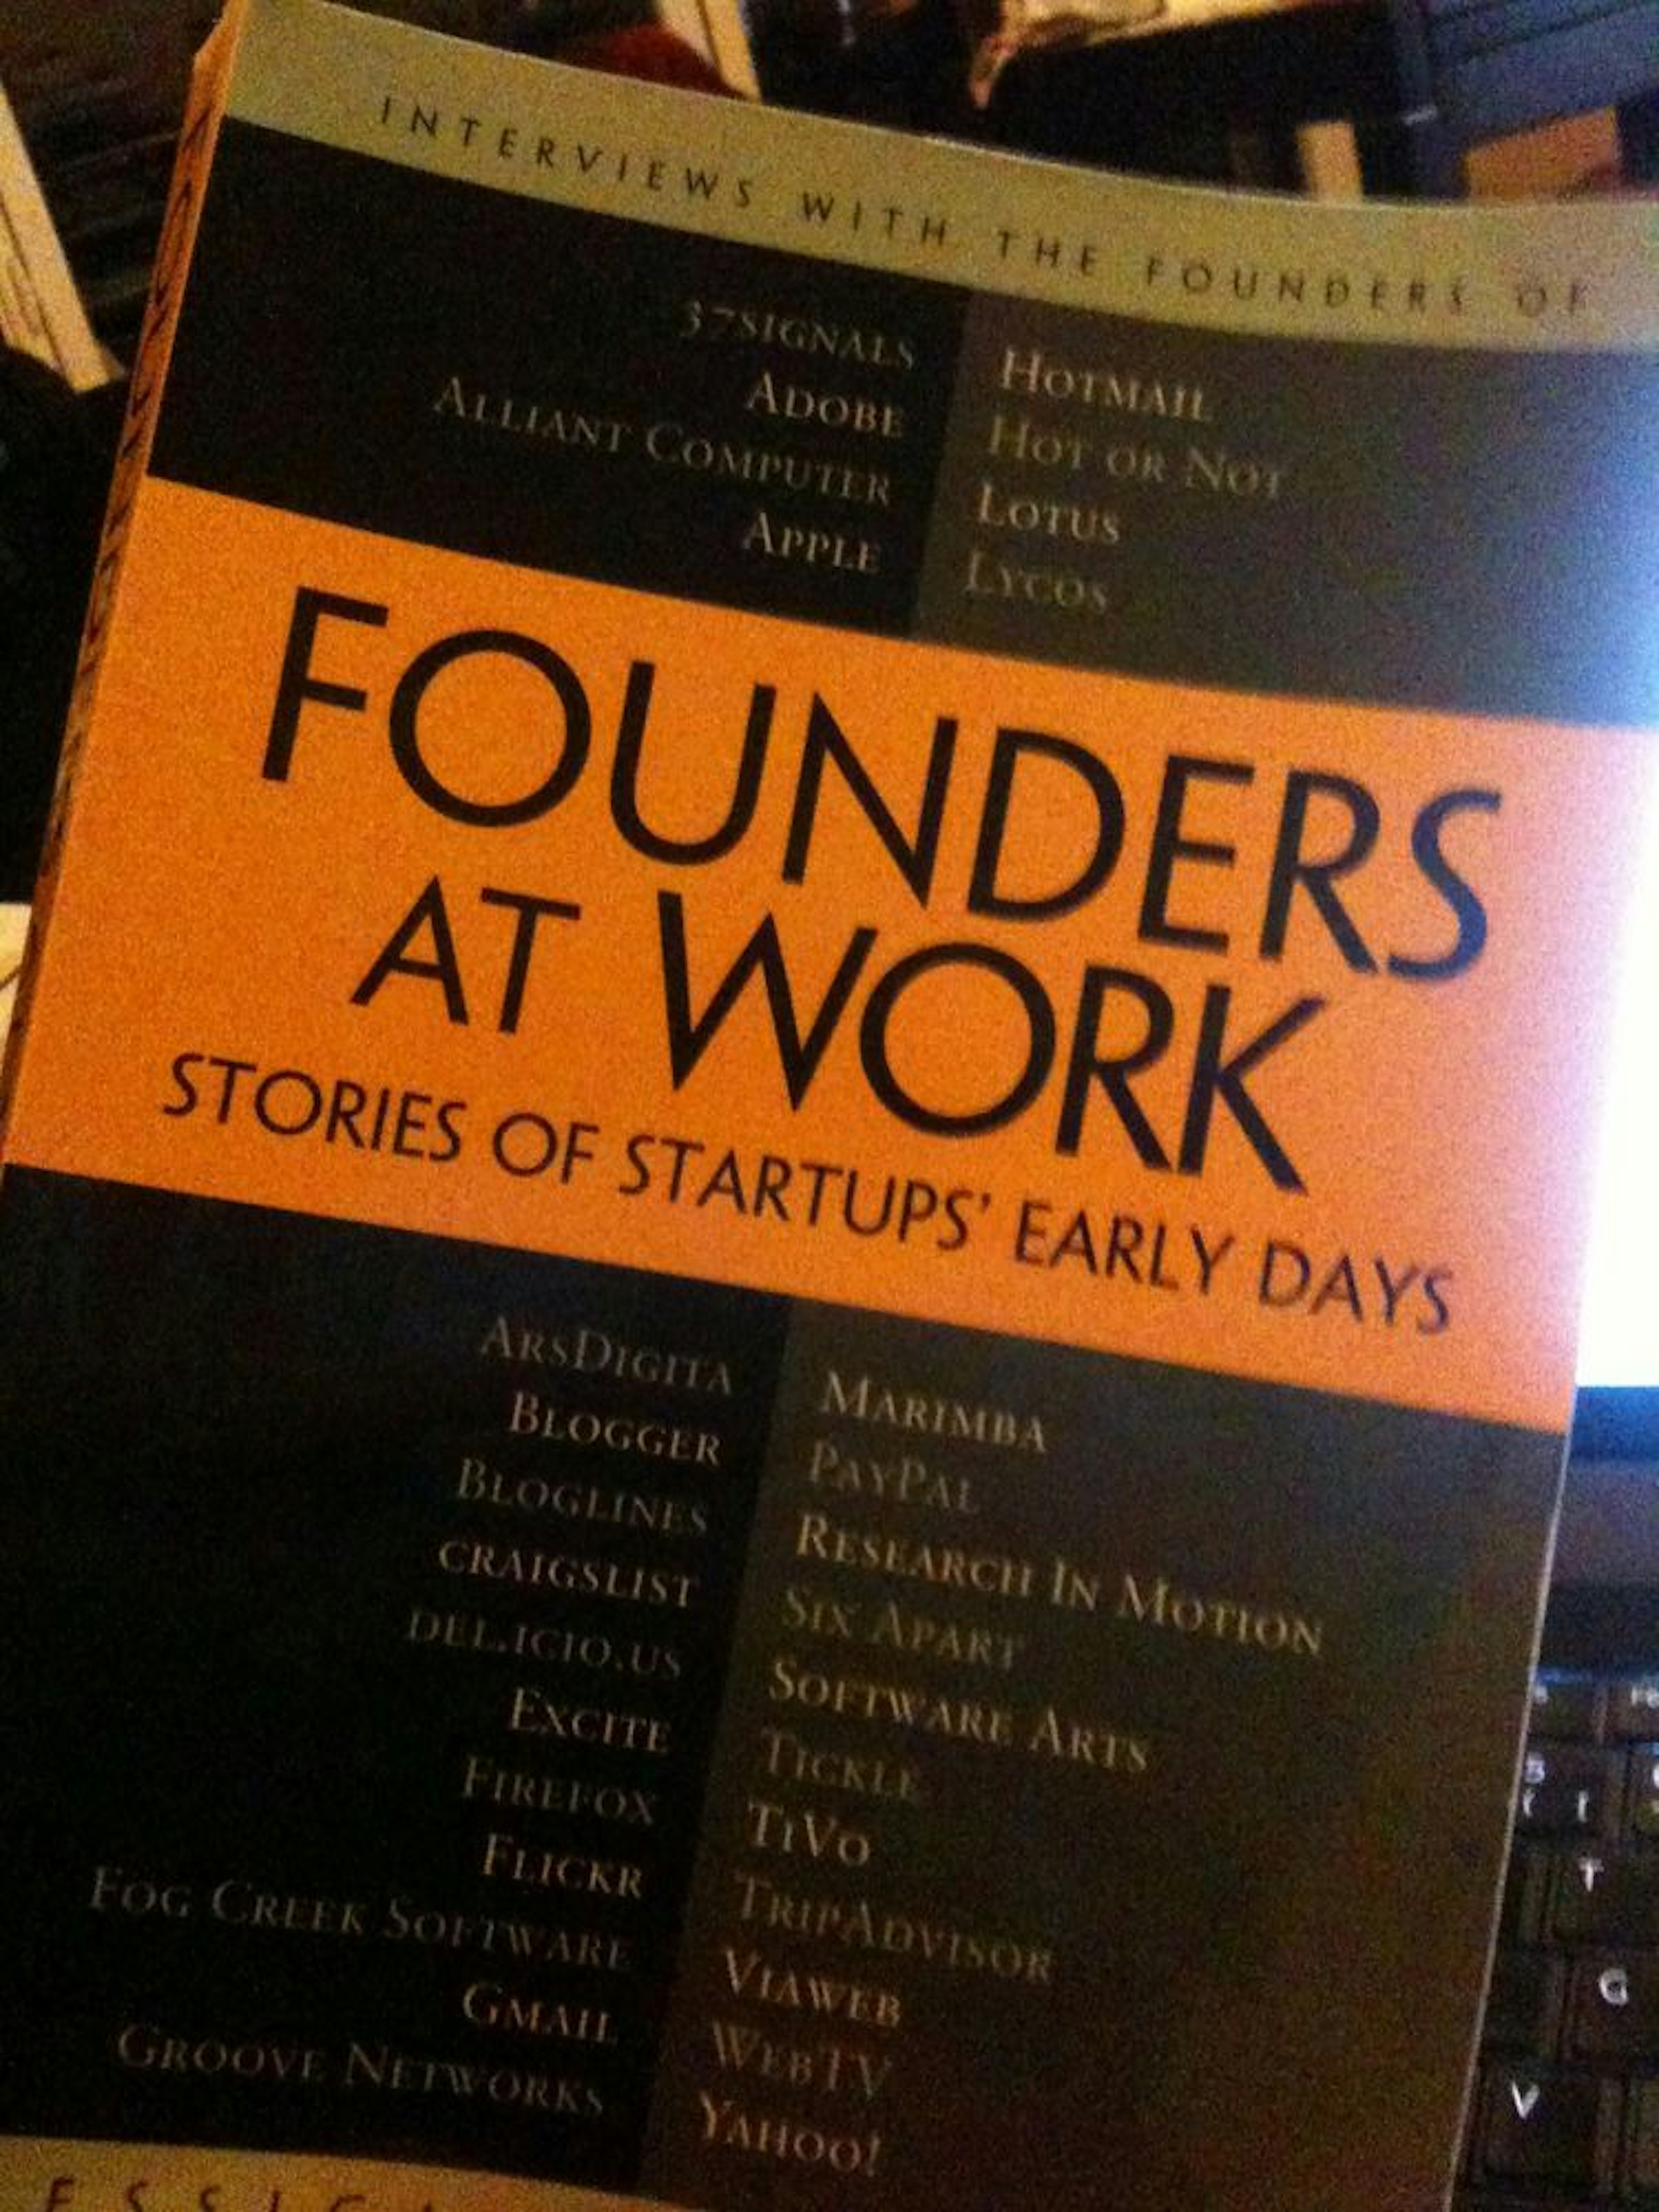 Founders at work